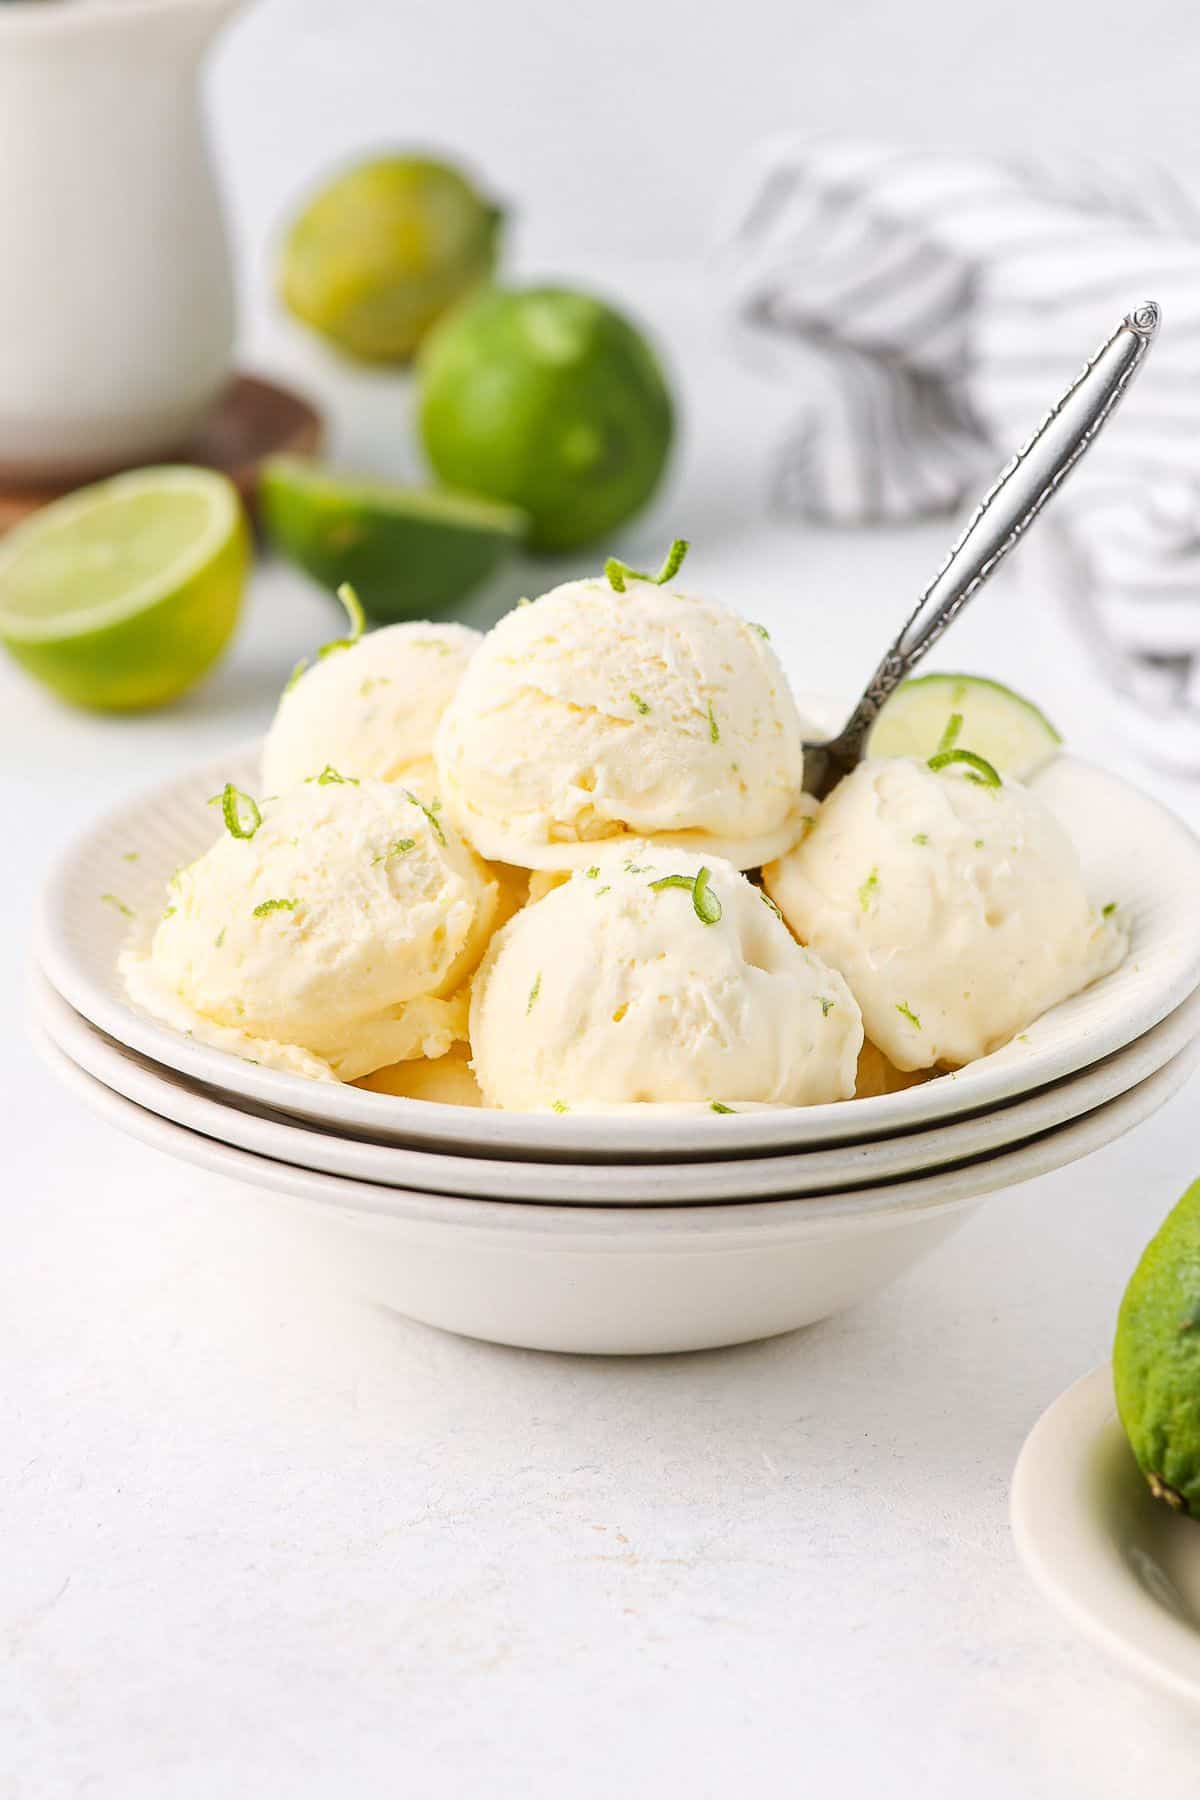 Bowl with several scoops of ice cream, garnished with lime zest, with a spoon sitting in it.